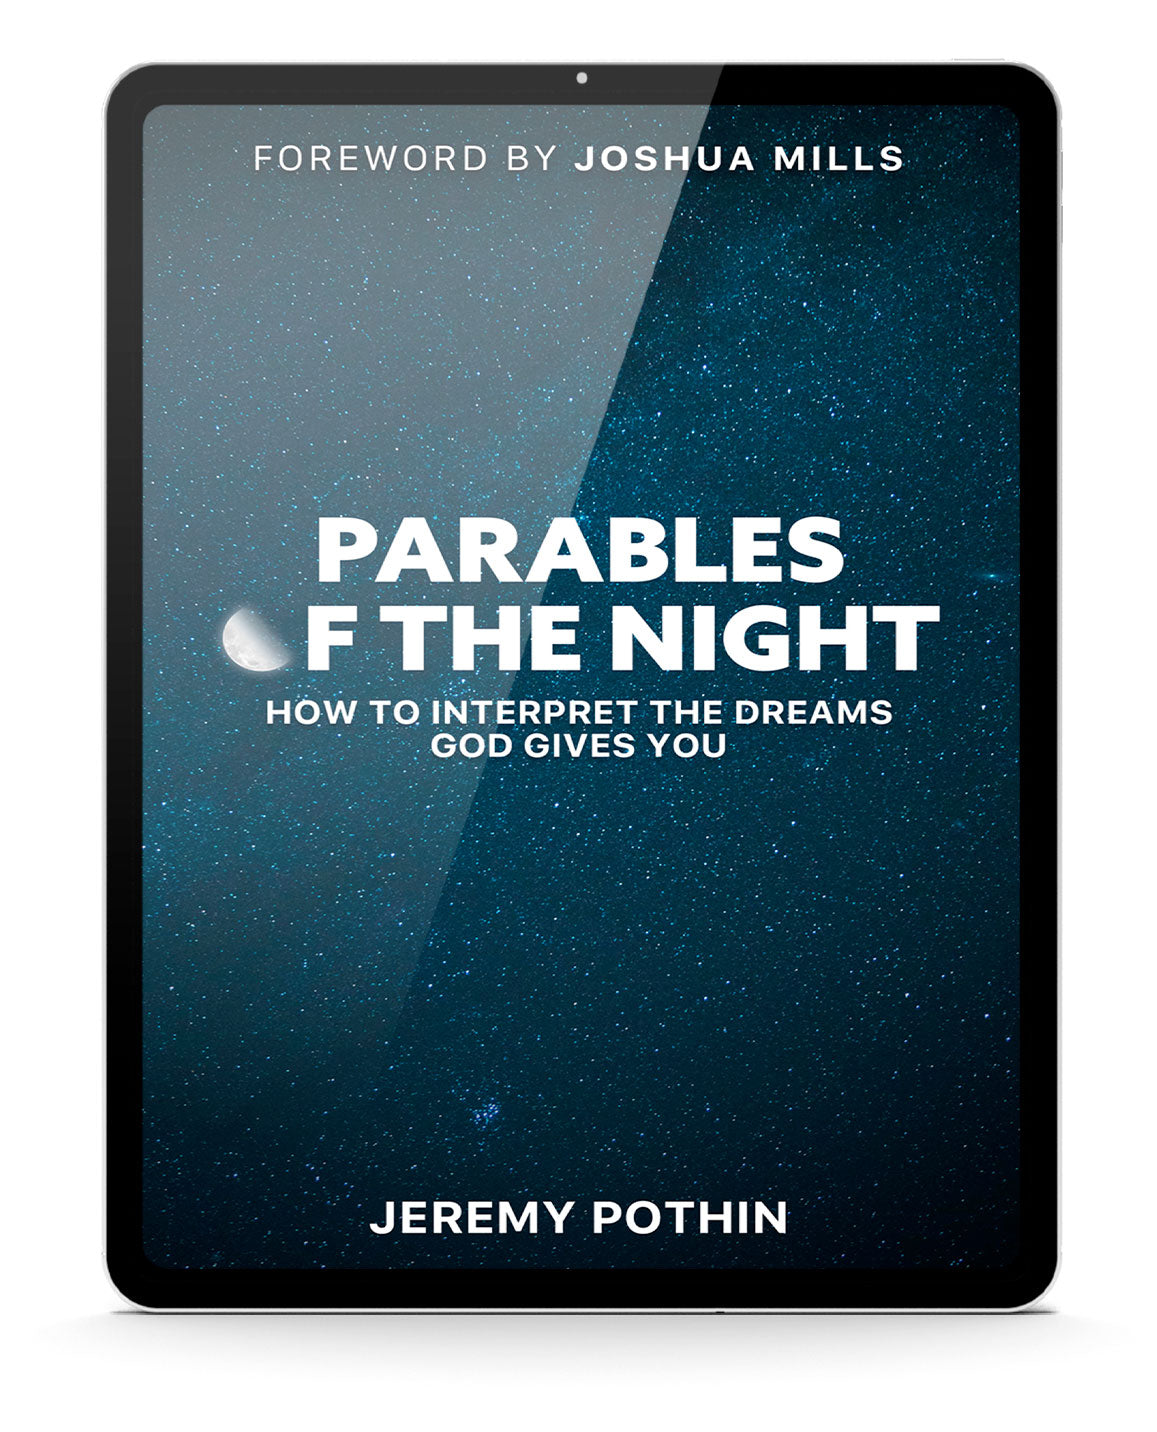 Parables of the night - Ebook (PDF)